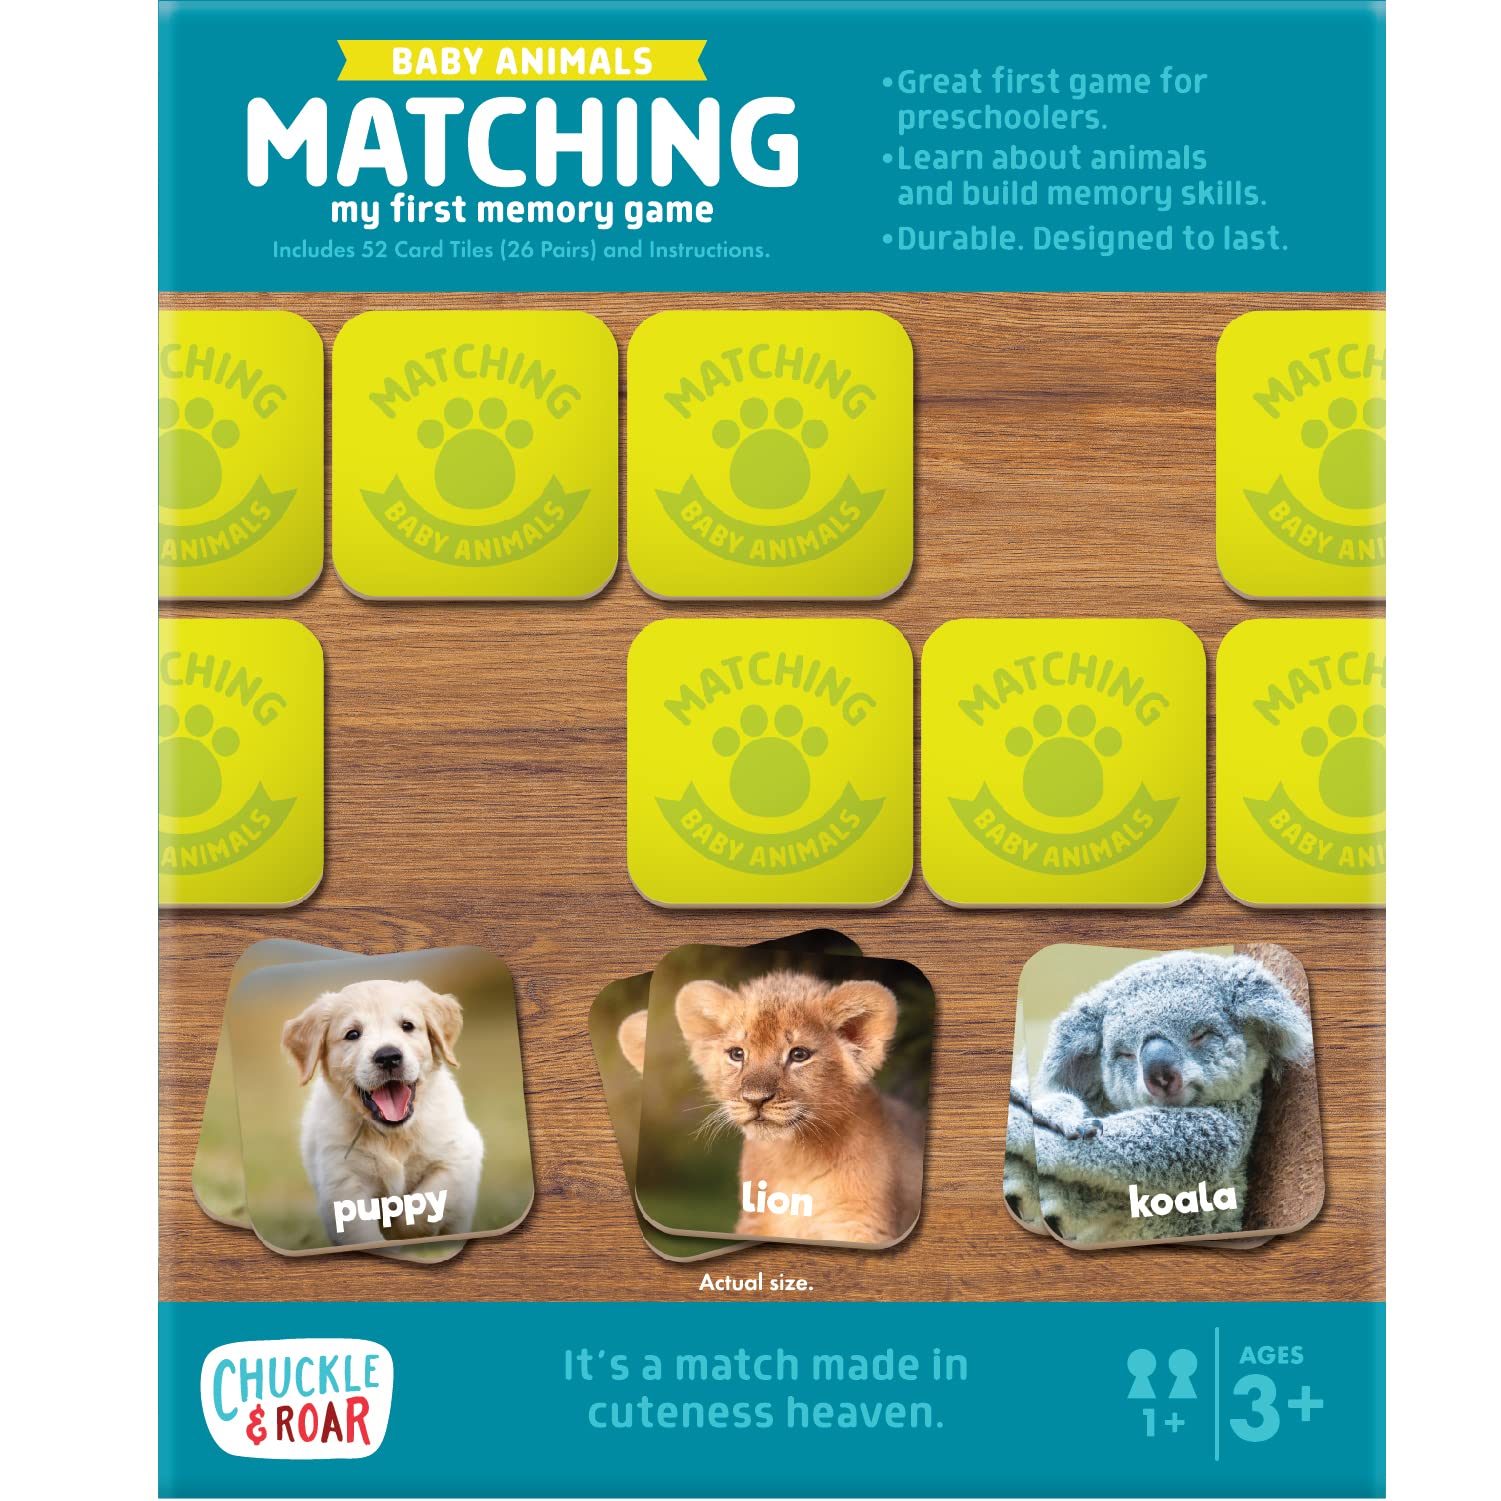 Chuckle & Roar Matching Game Baby Animals - Board Game for Kids 3 and up - Concentration Game for Toddlers - Preschool Game